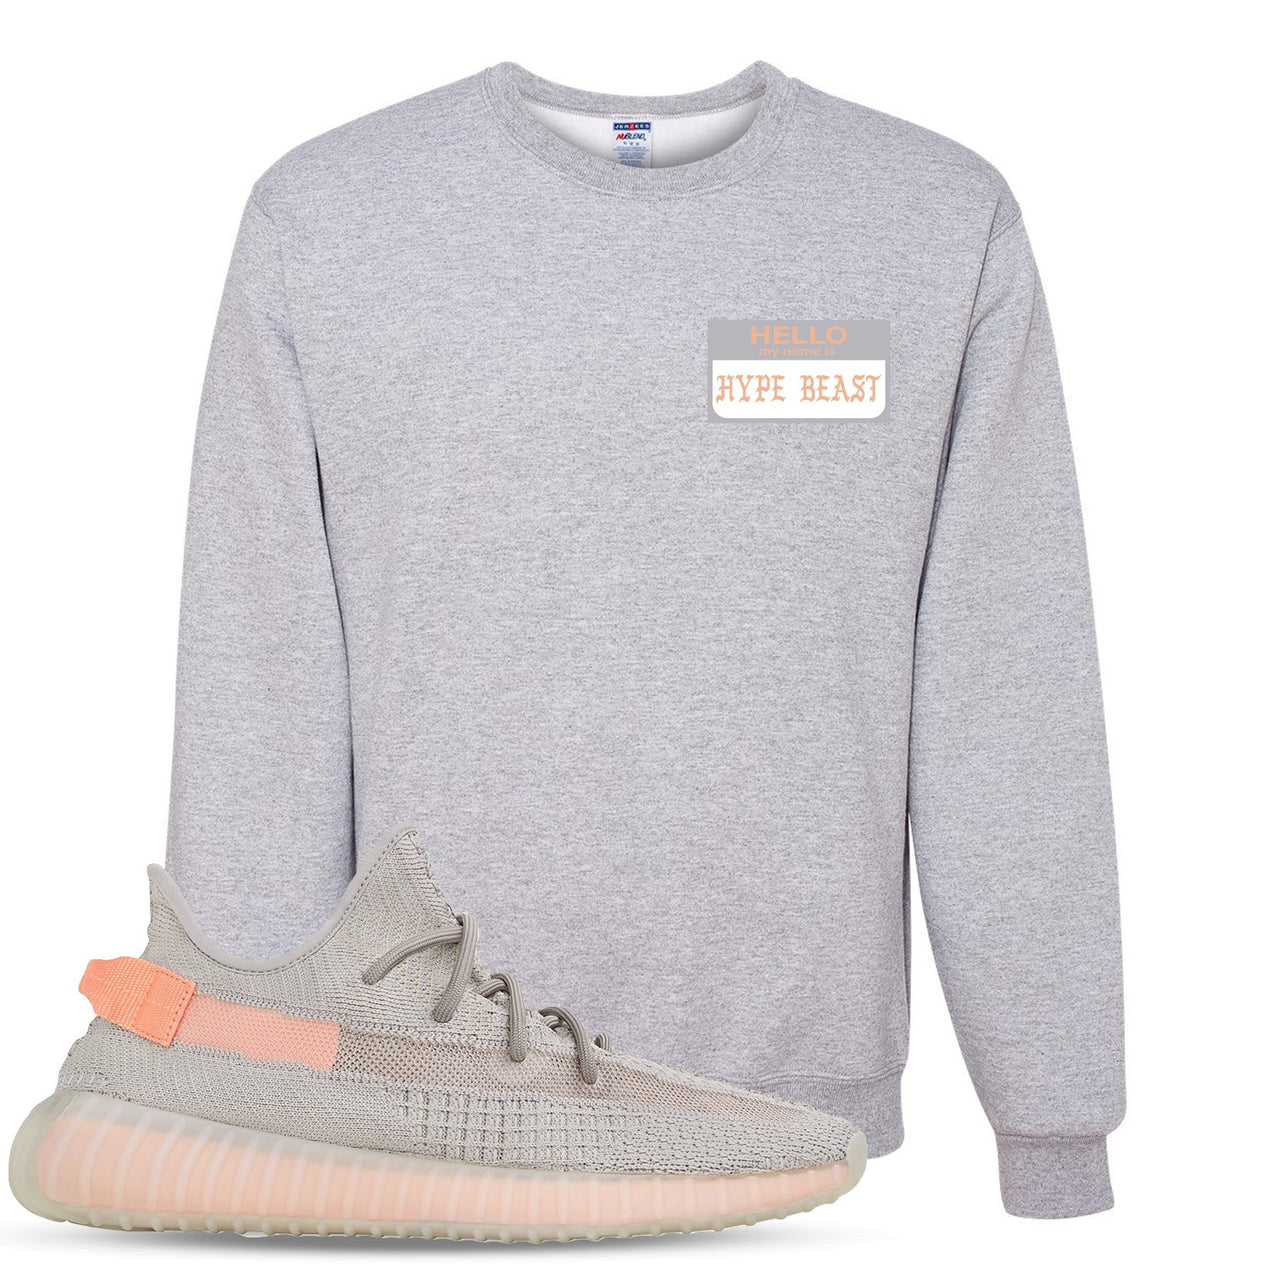 True Form v2 350s Crewneck Sweater | Hello My Name Is Hype Beast Pablo, Heathered Light Gray